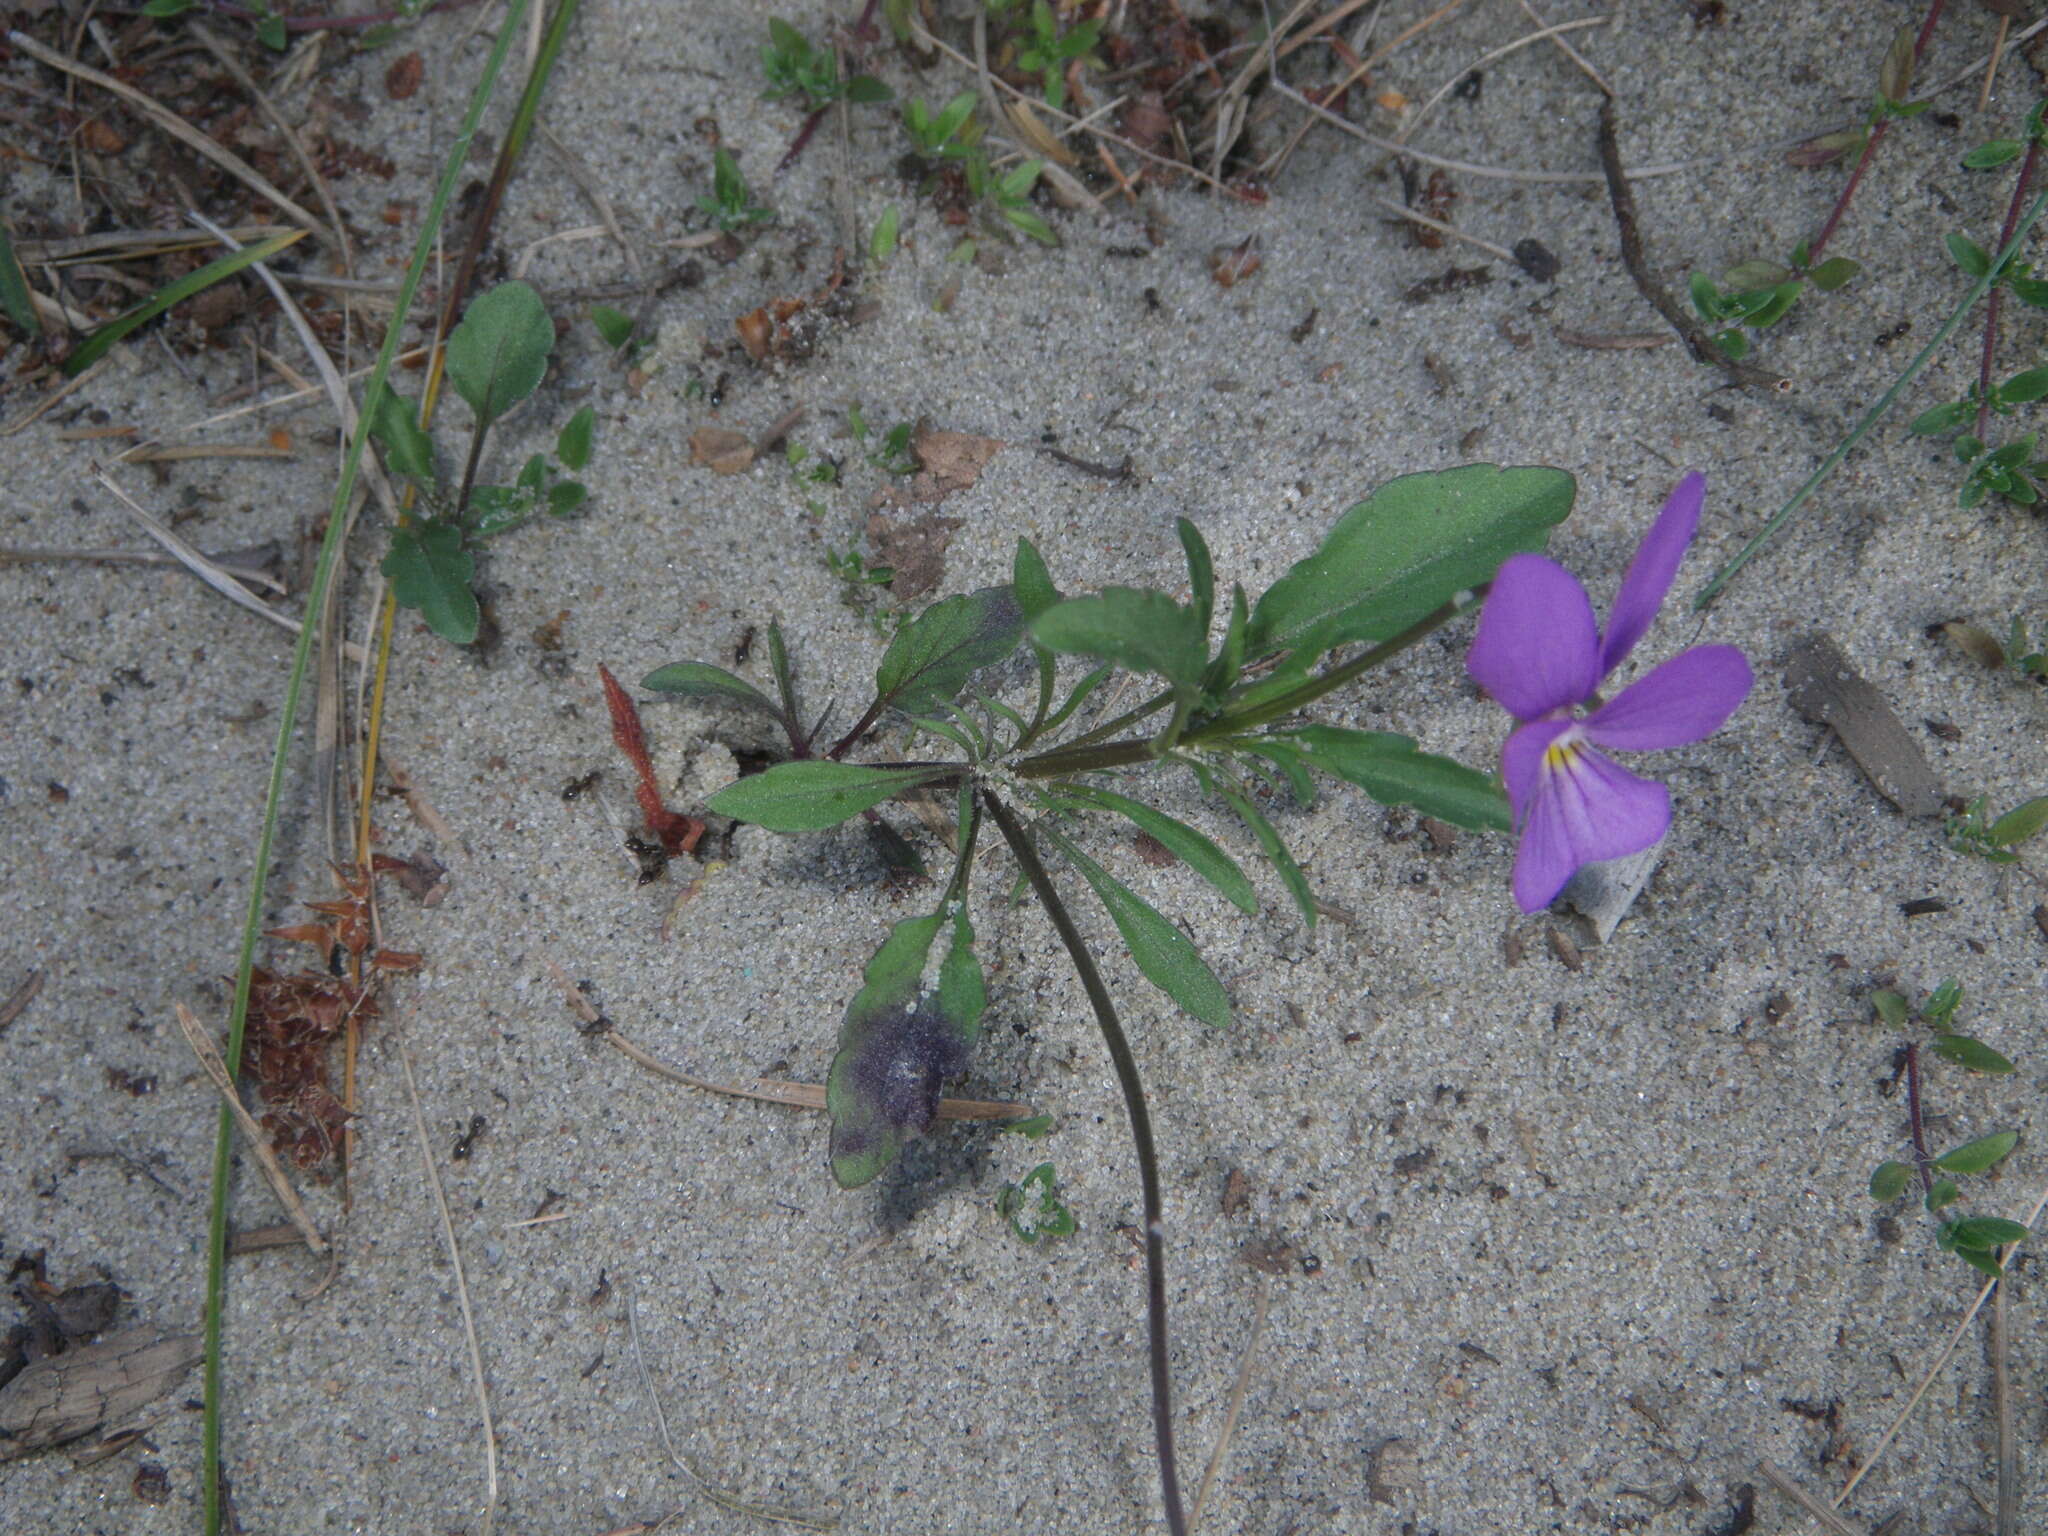 Image of Viola tricolor subsp. curtisii (E. Forster) Syme